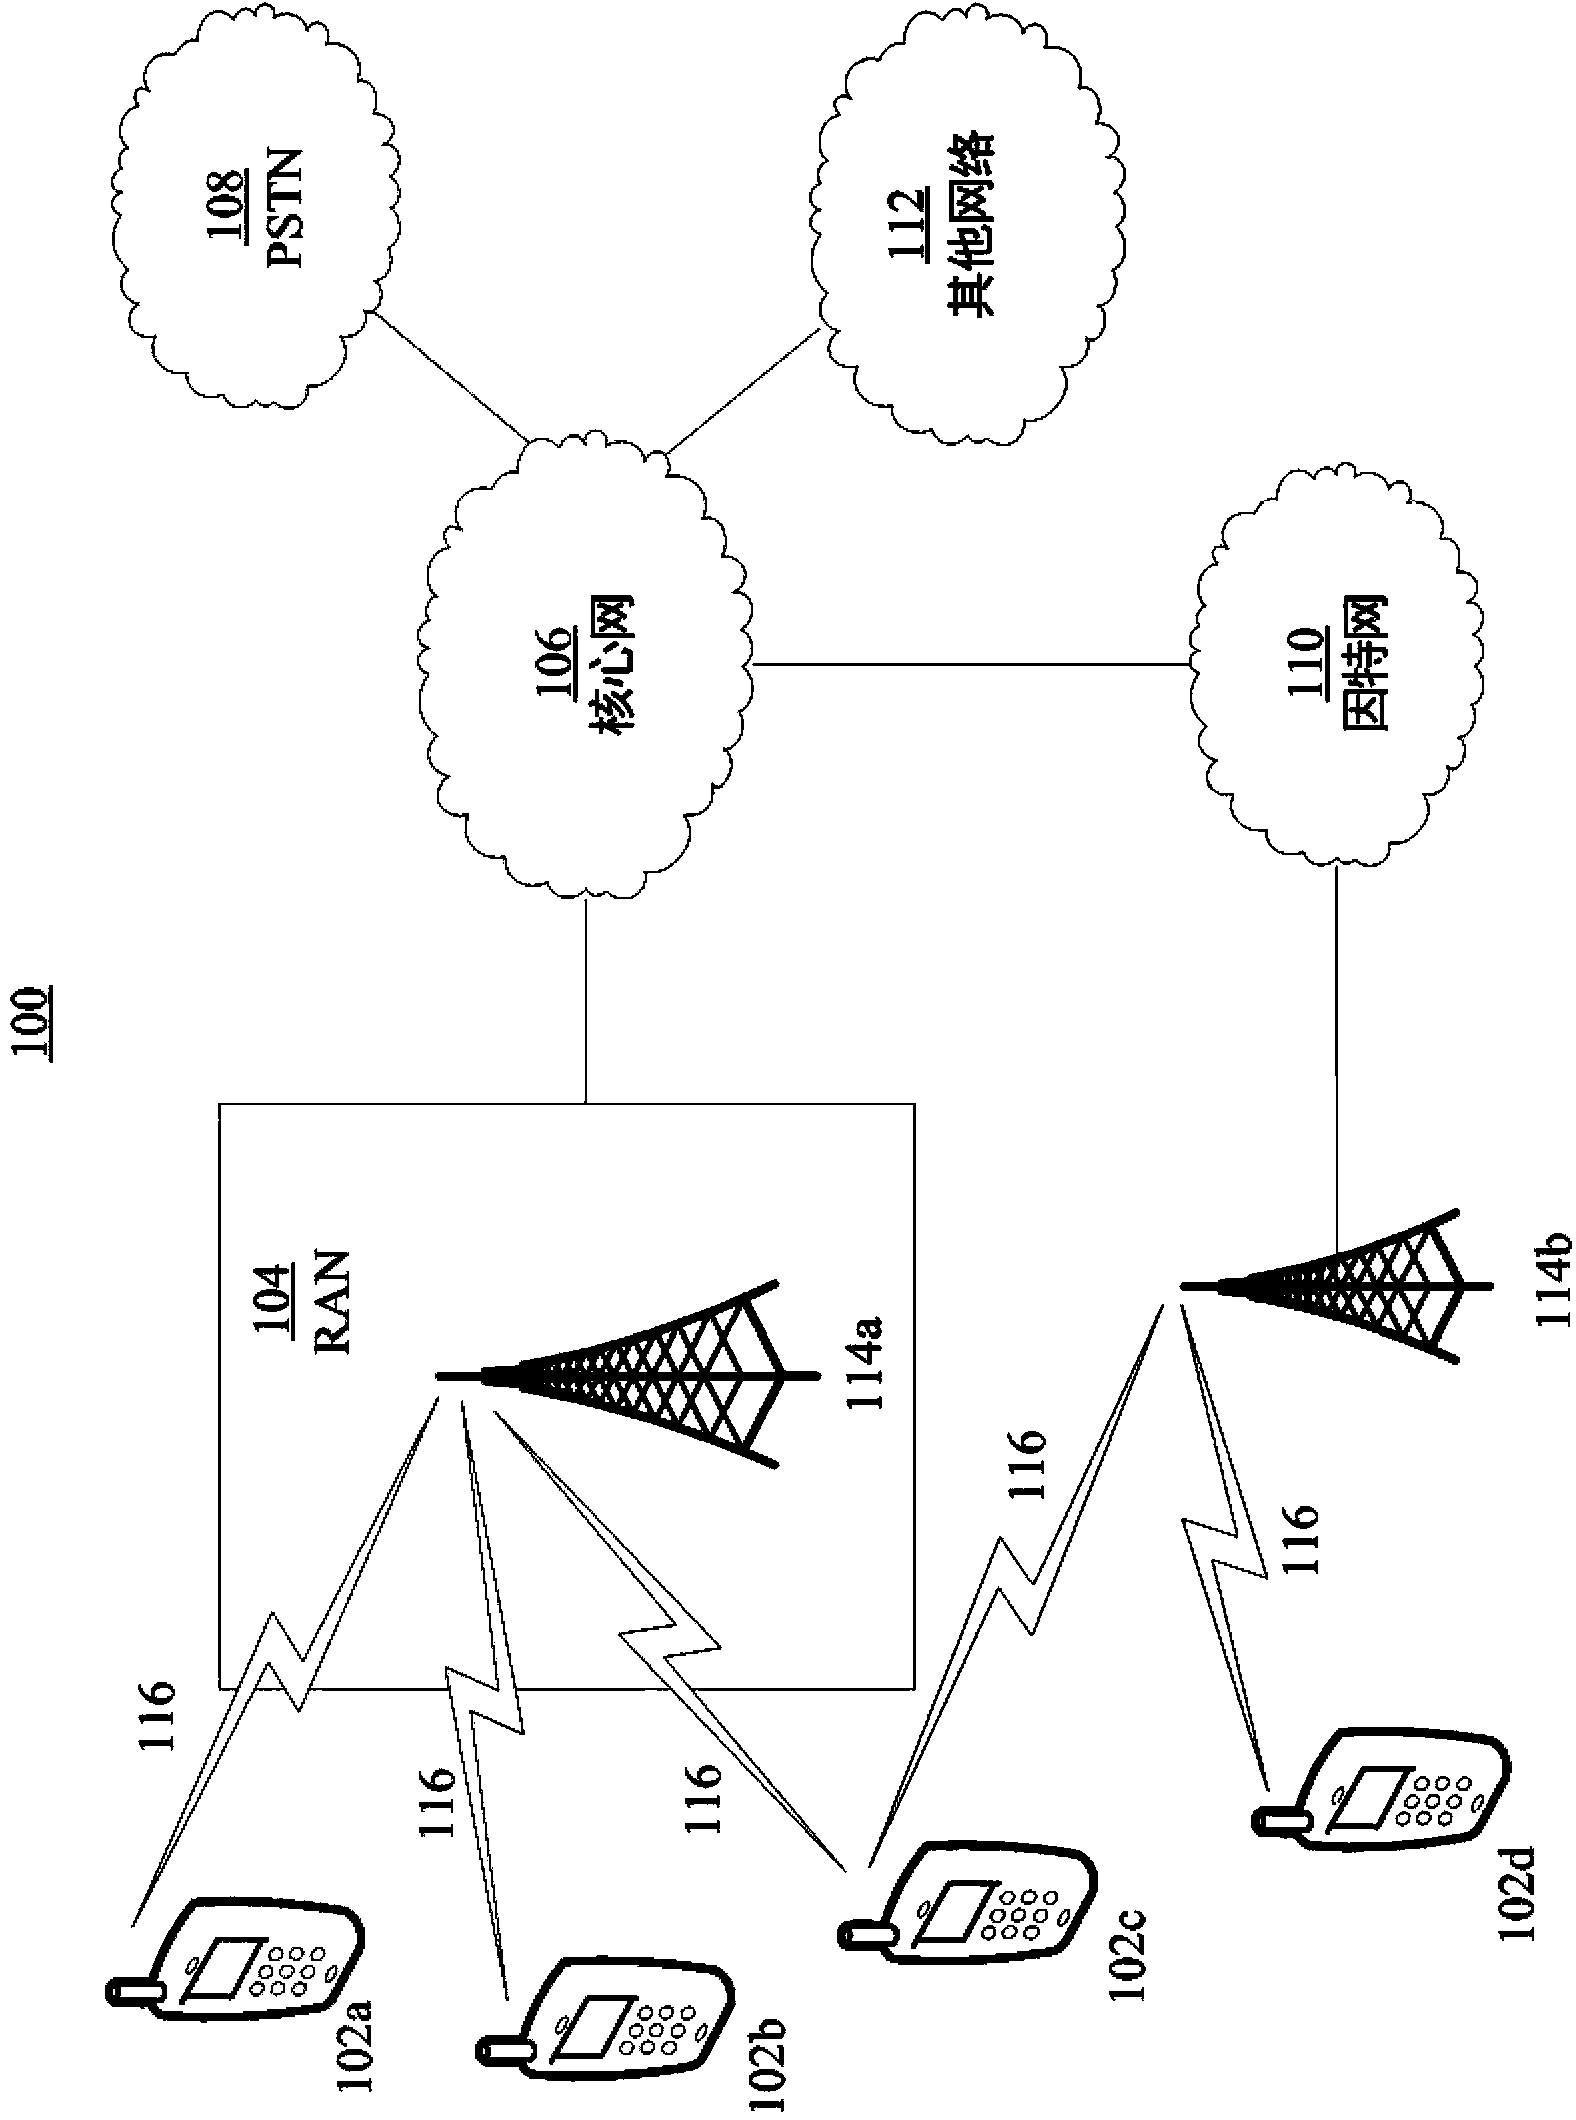 Authentication and secure channel setup for communication handoff scenarios